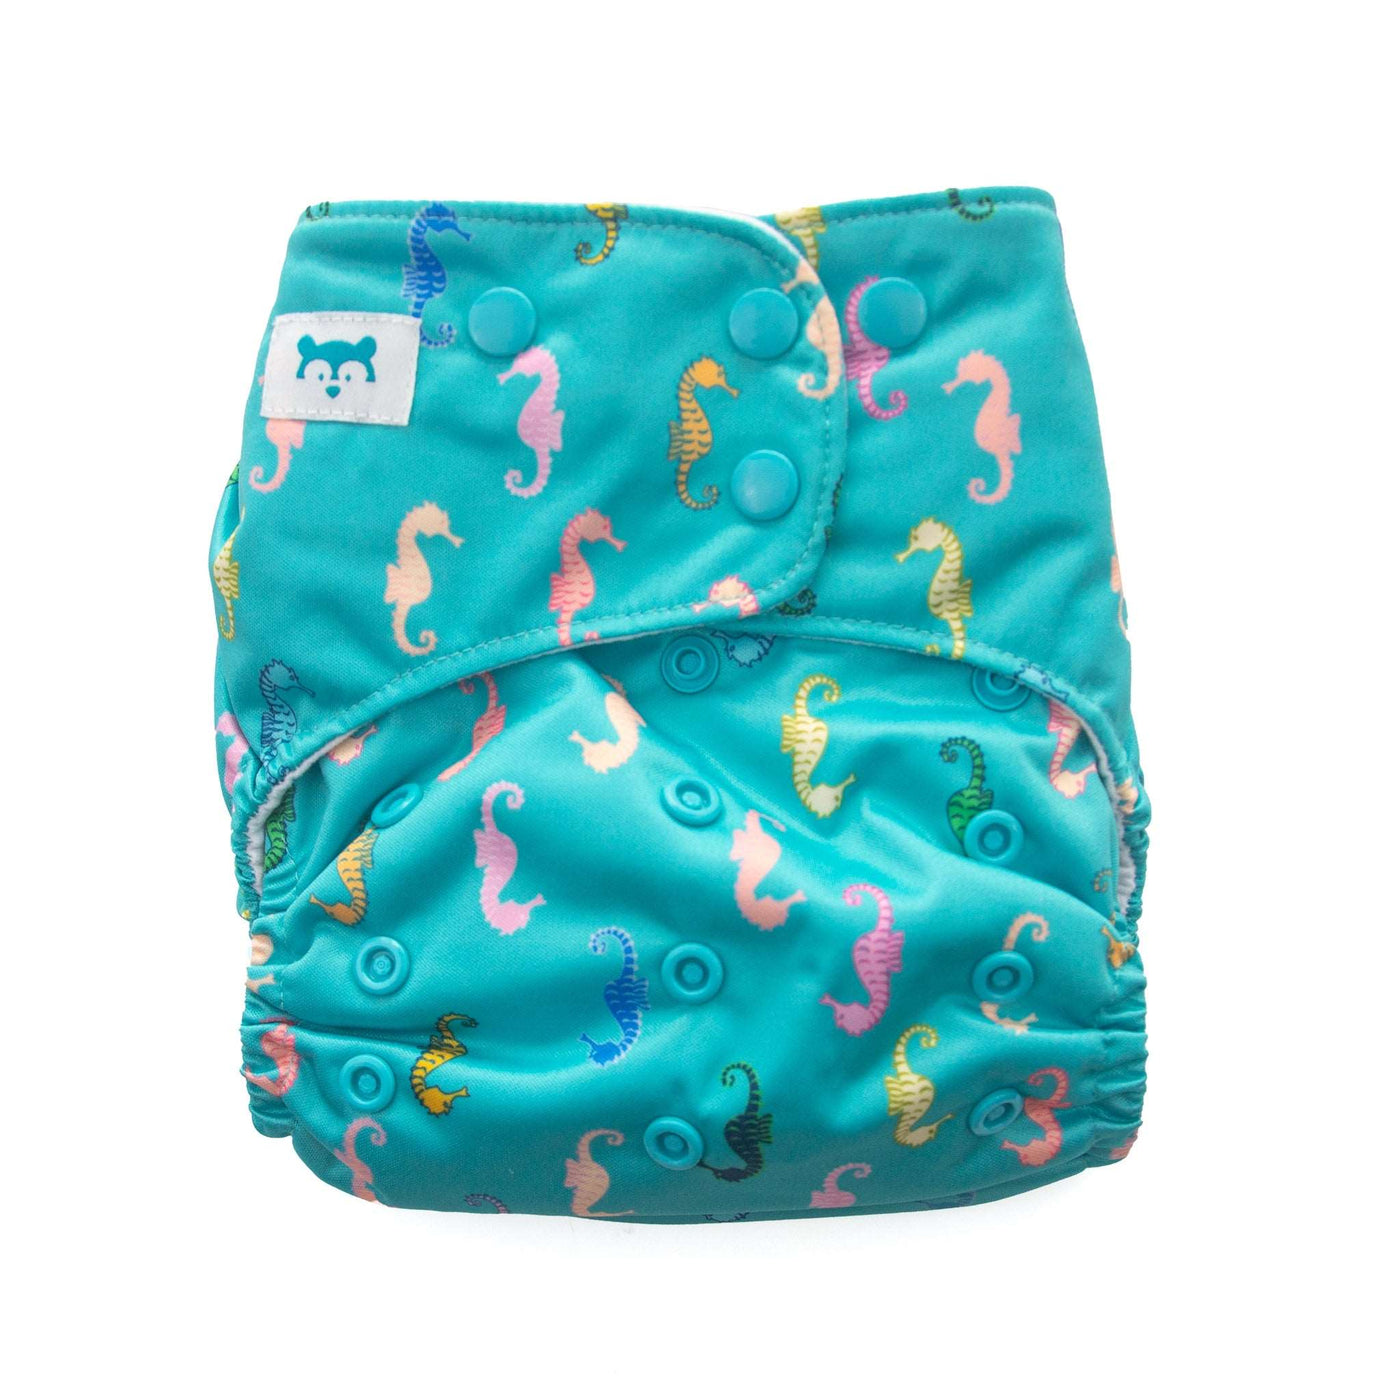 Cloth nappy with sea life pattern